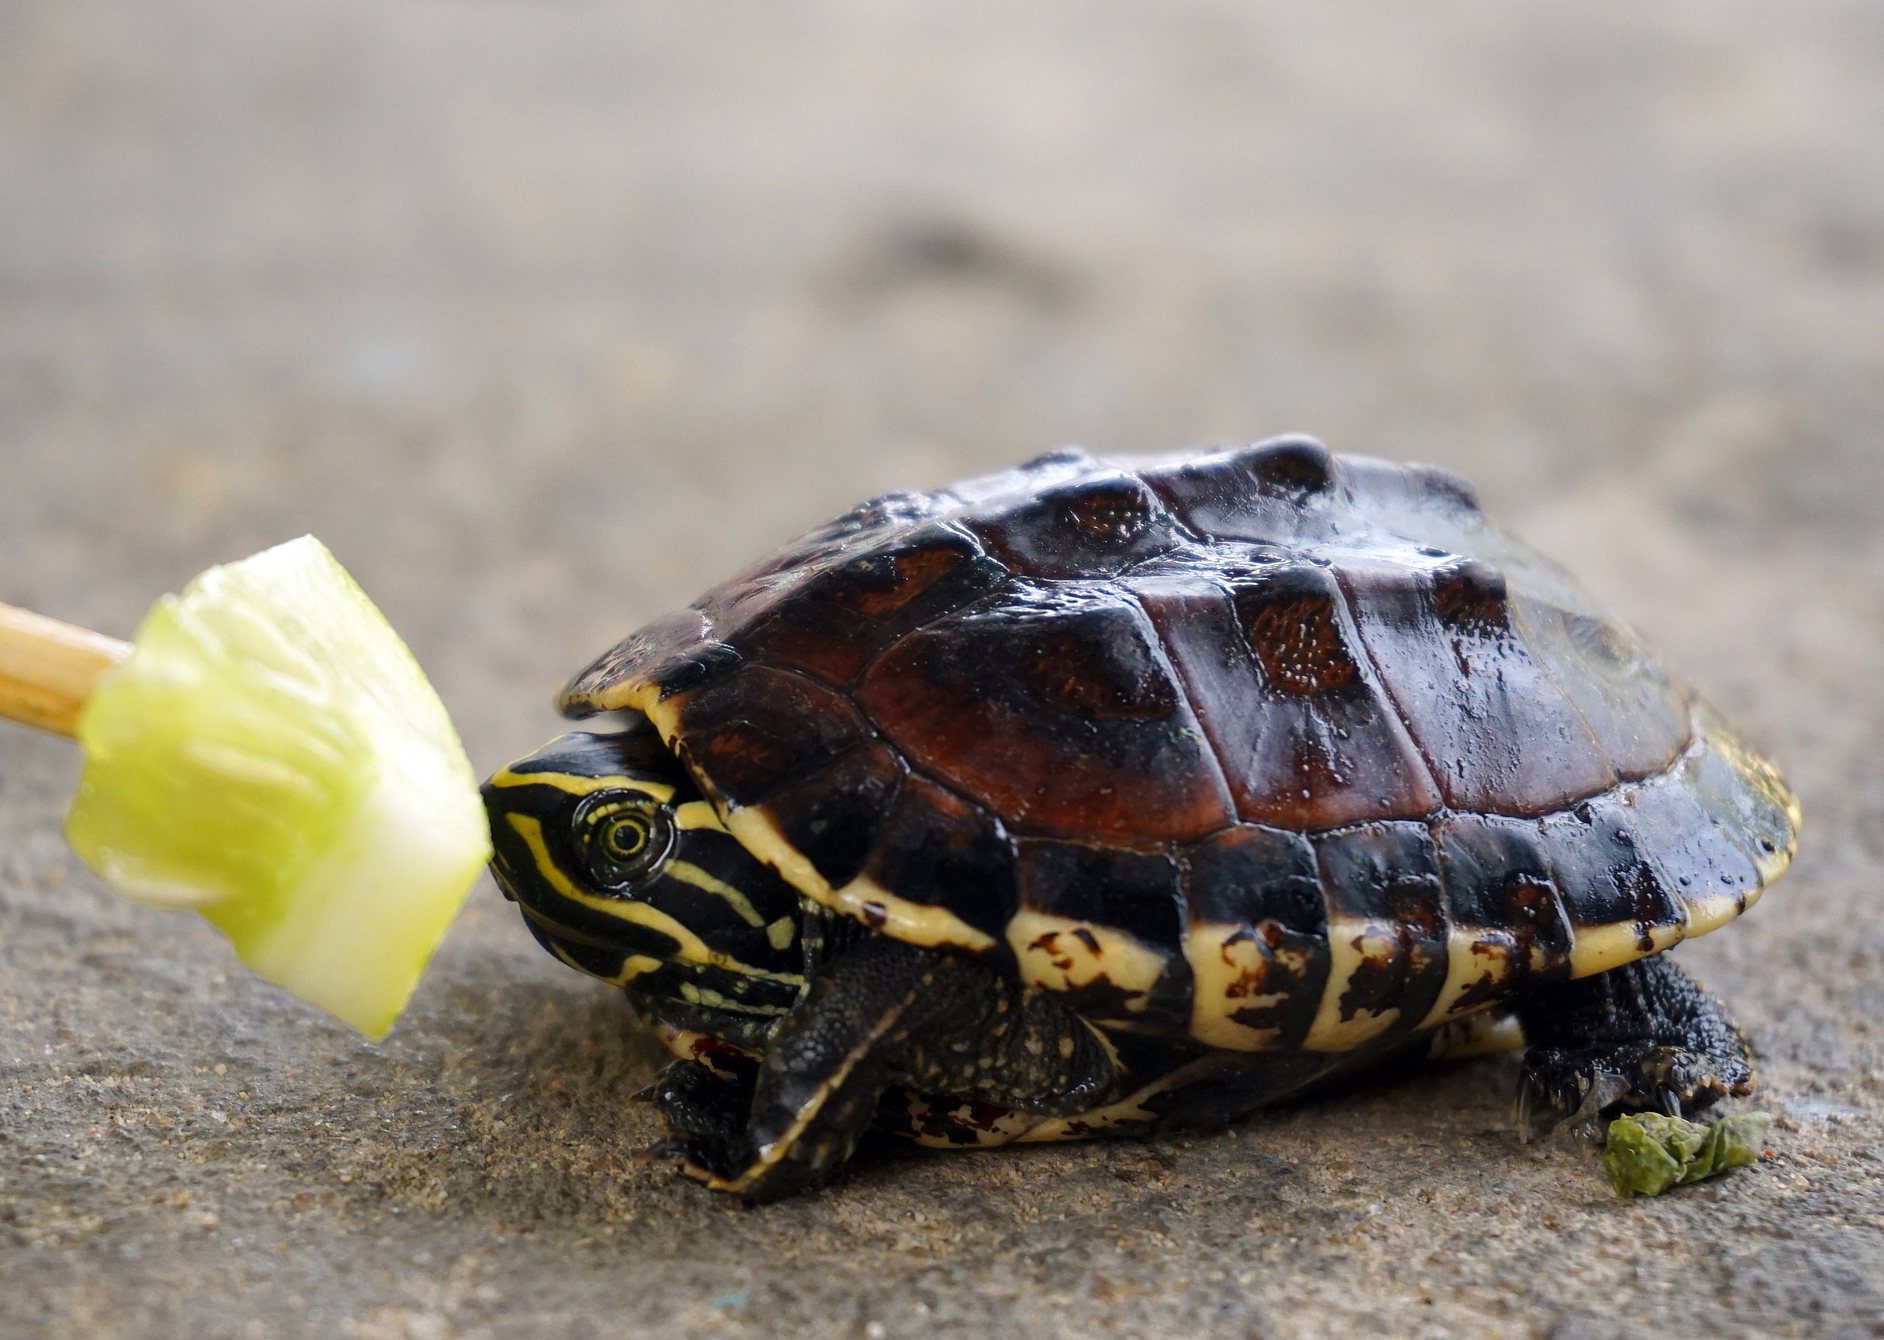 What Do Baby Turtles Eat?